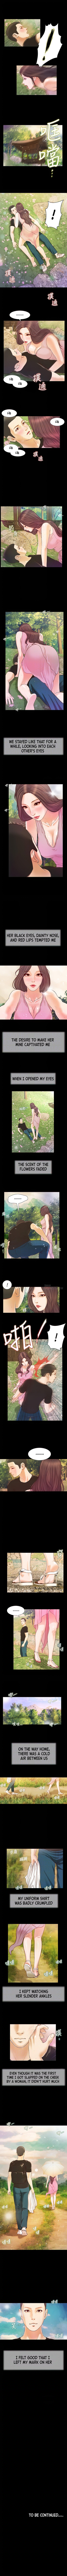 Concubine - Chapter 7 Page 4